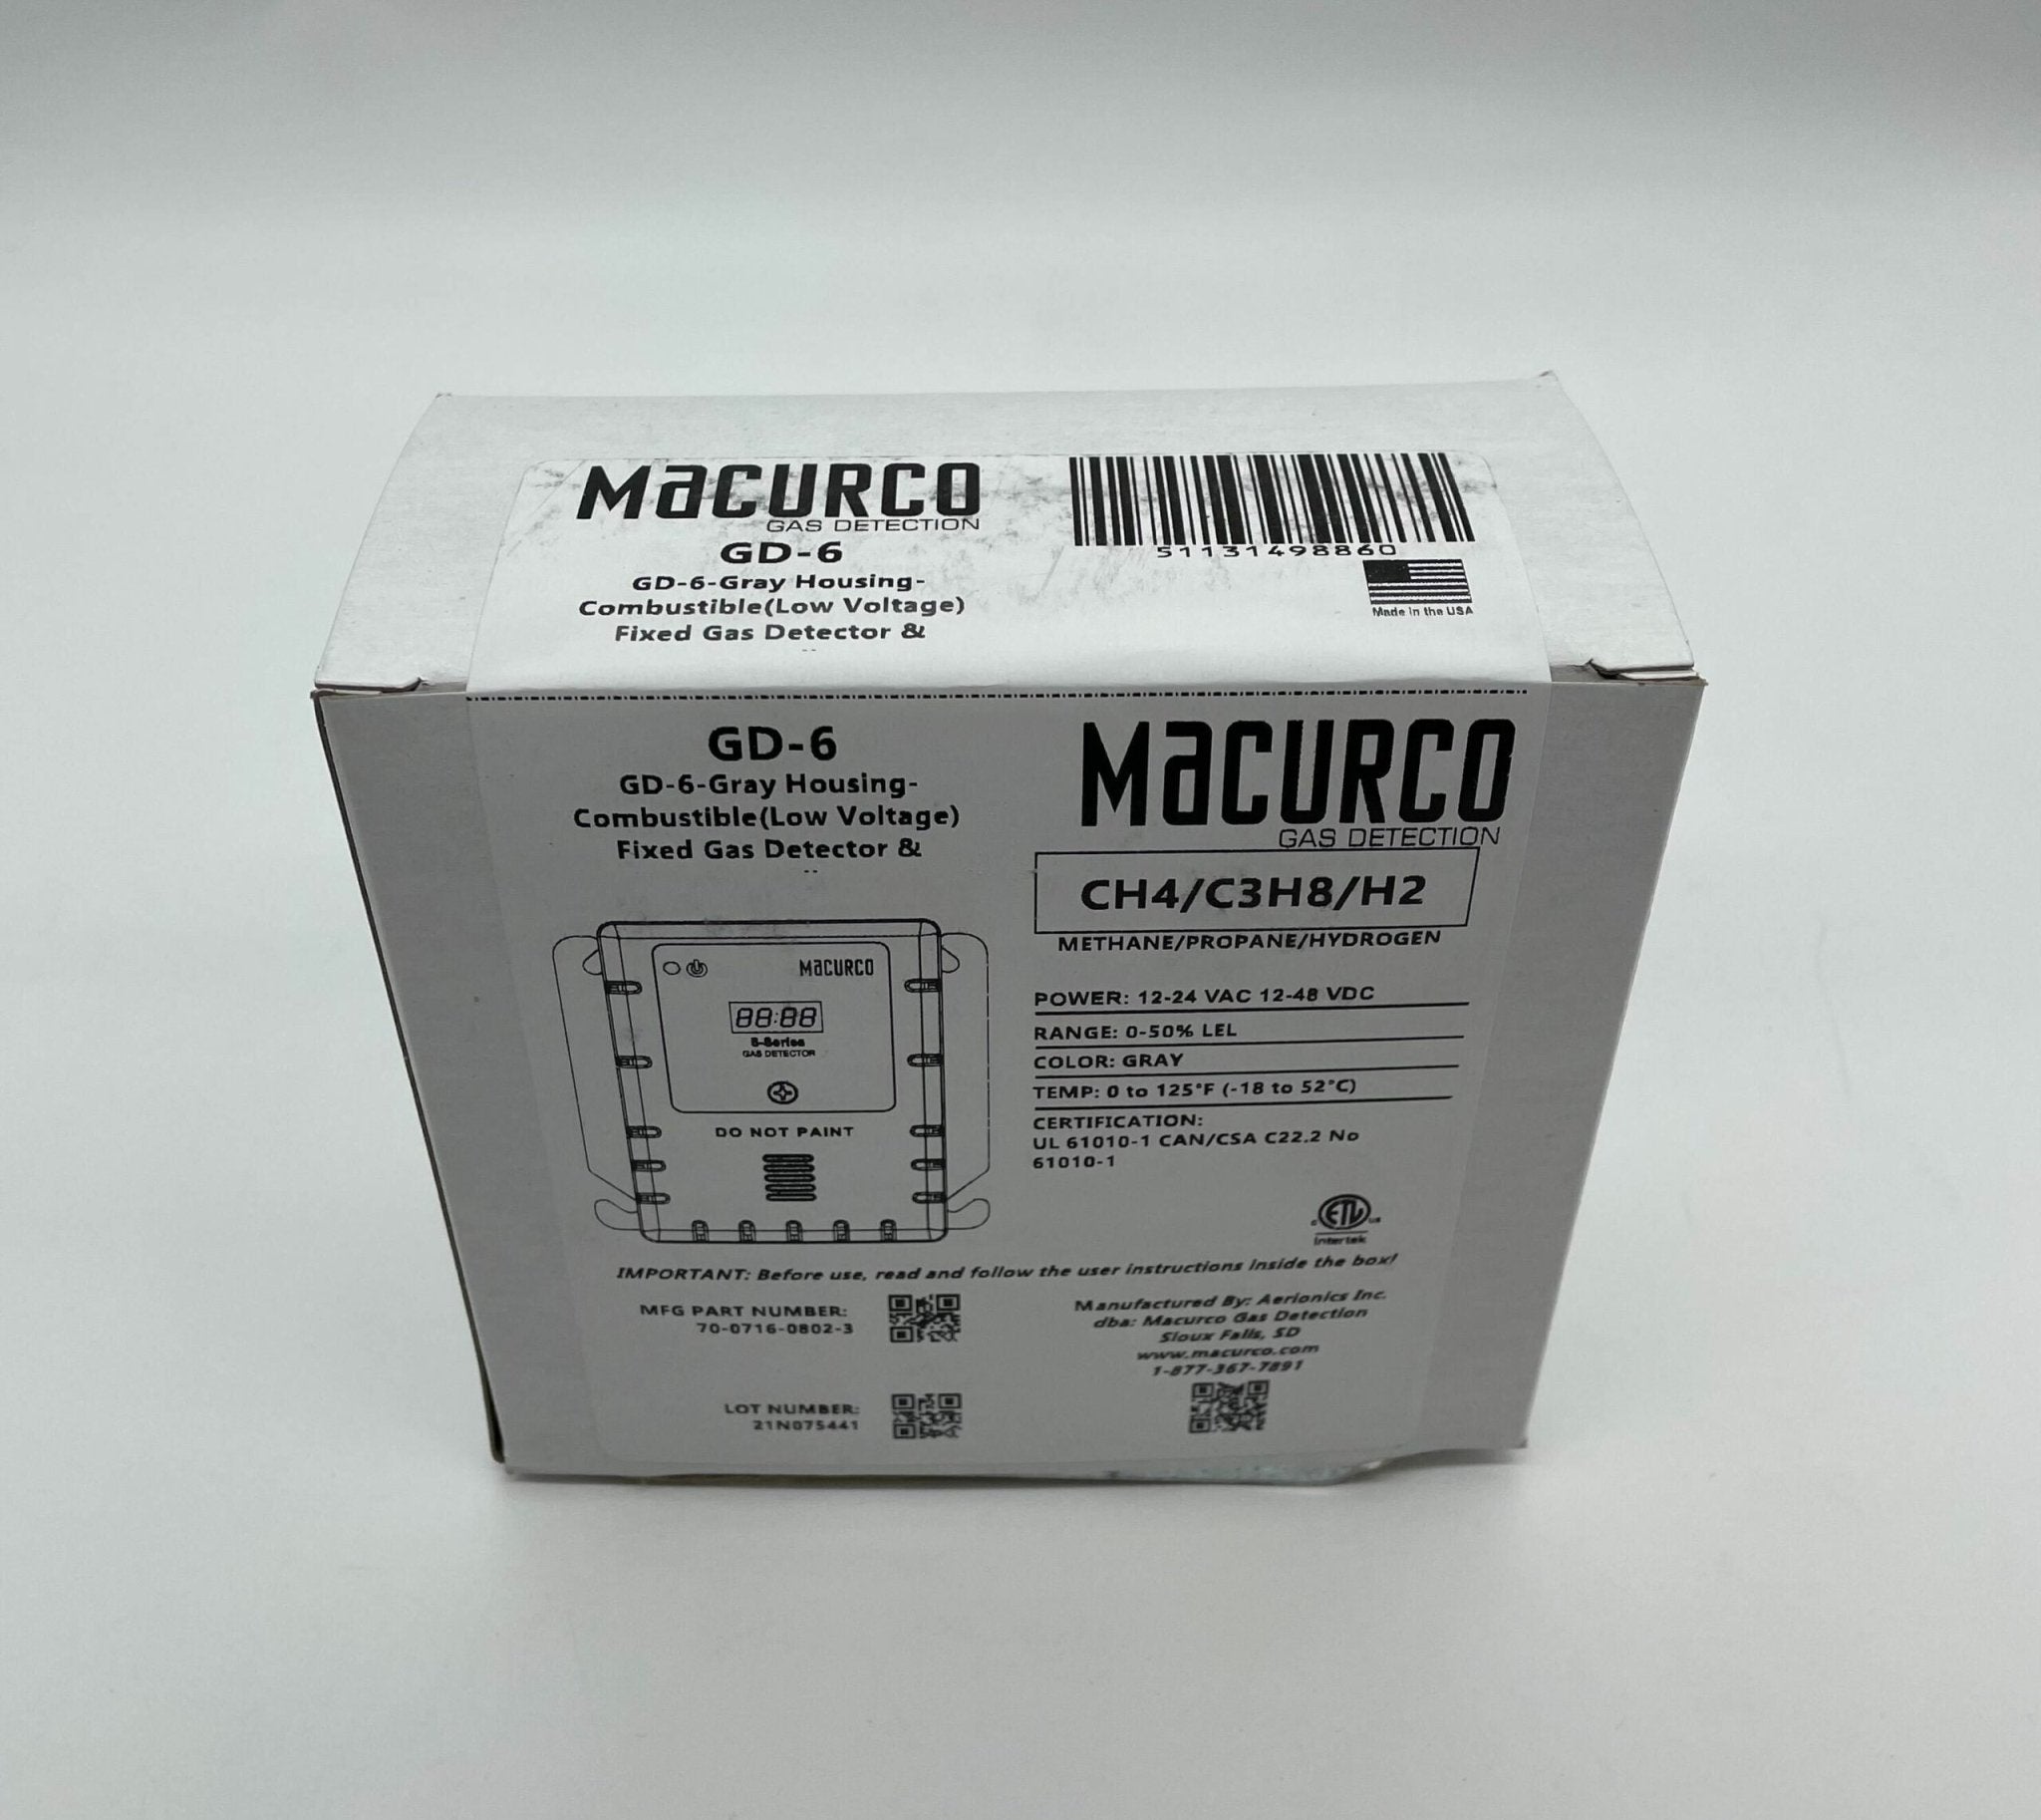 Macurco GD-6 - The Fire Alarm Supplier